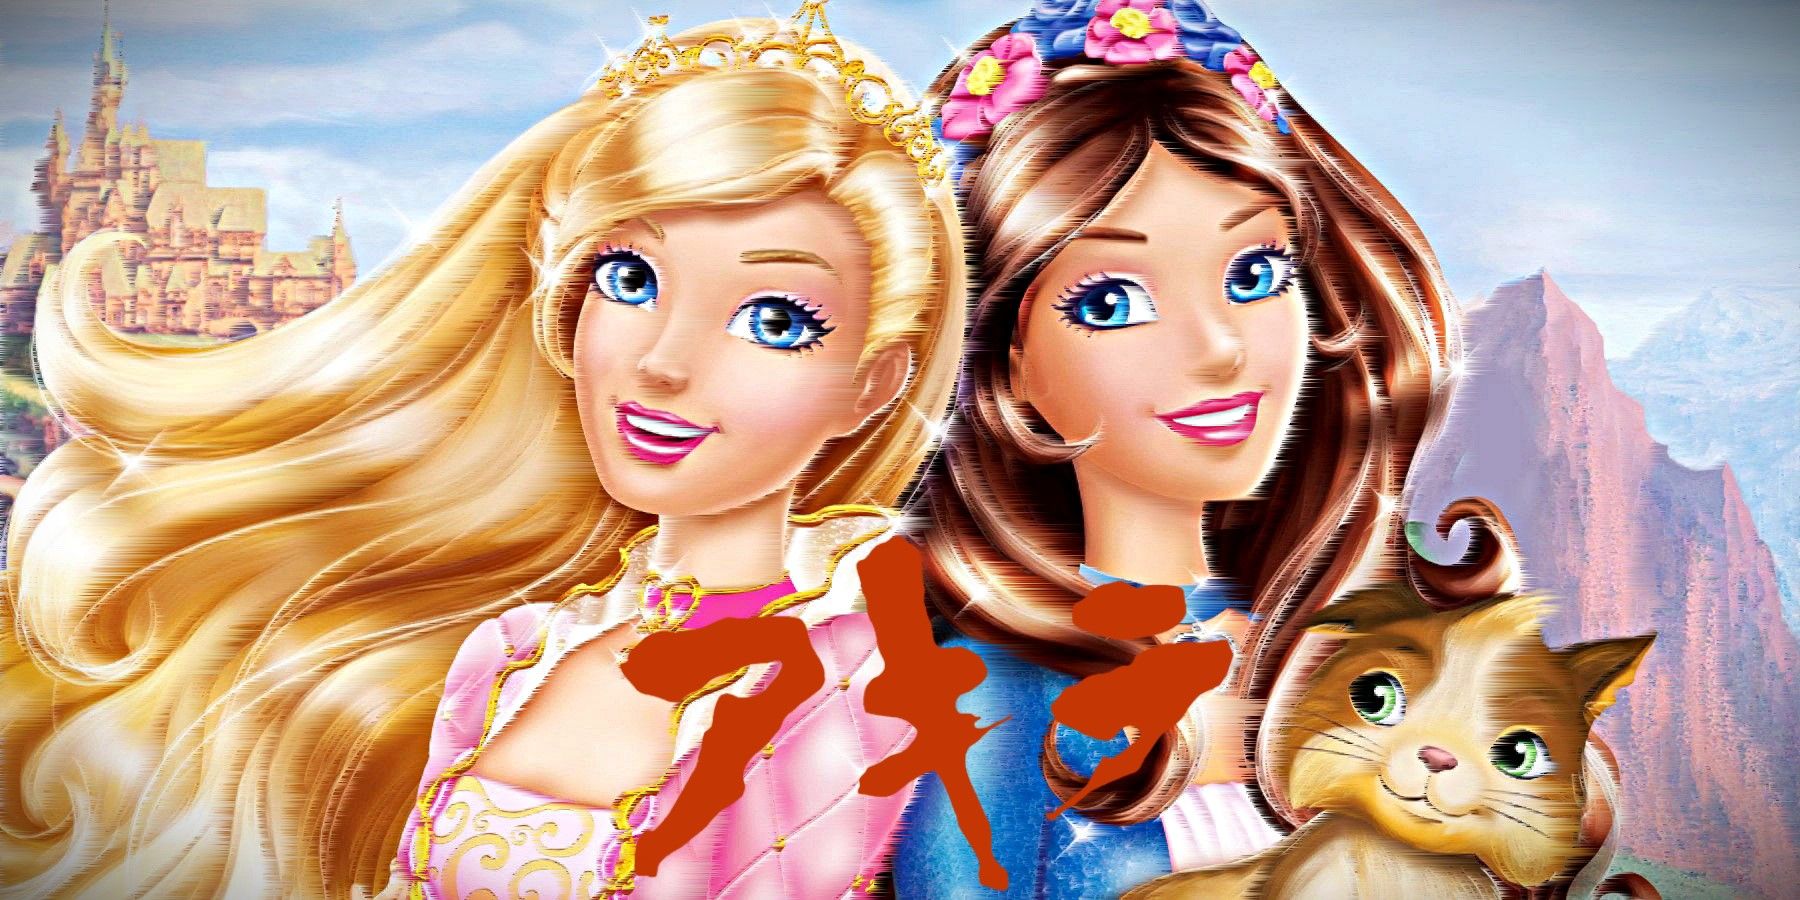 Barbie as the Princess and the Pauper poster with Akira anime Japanese logo